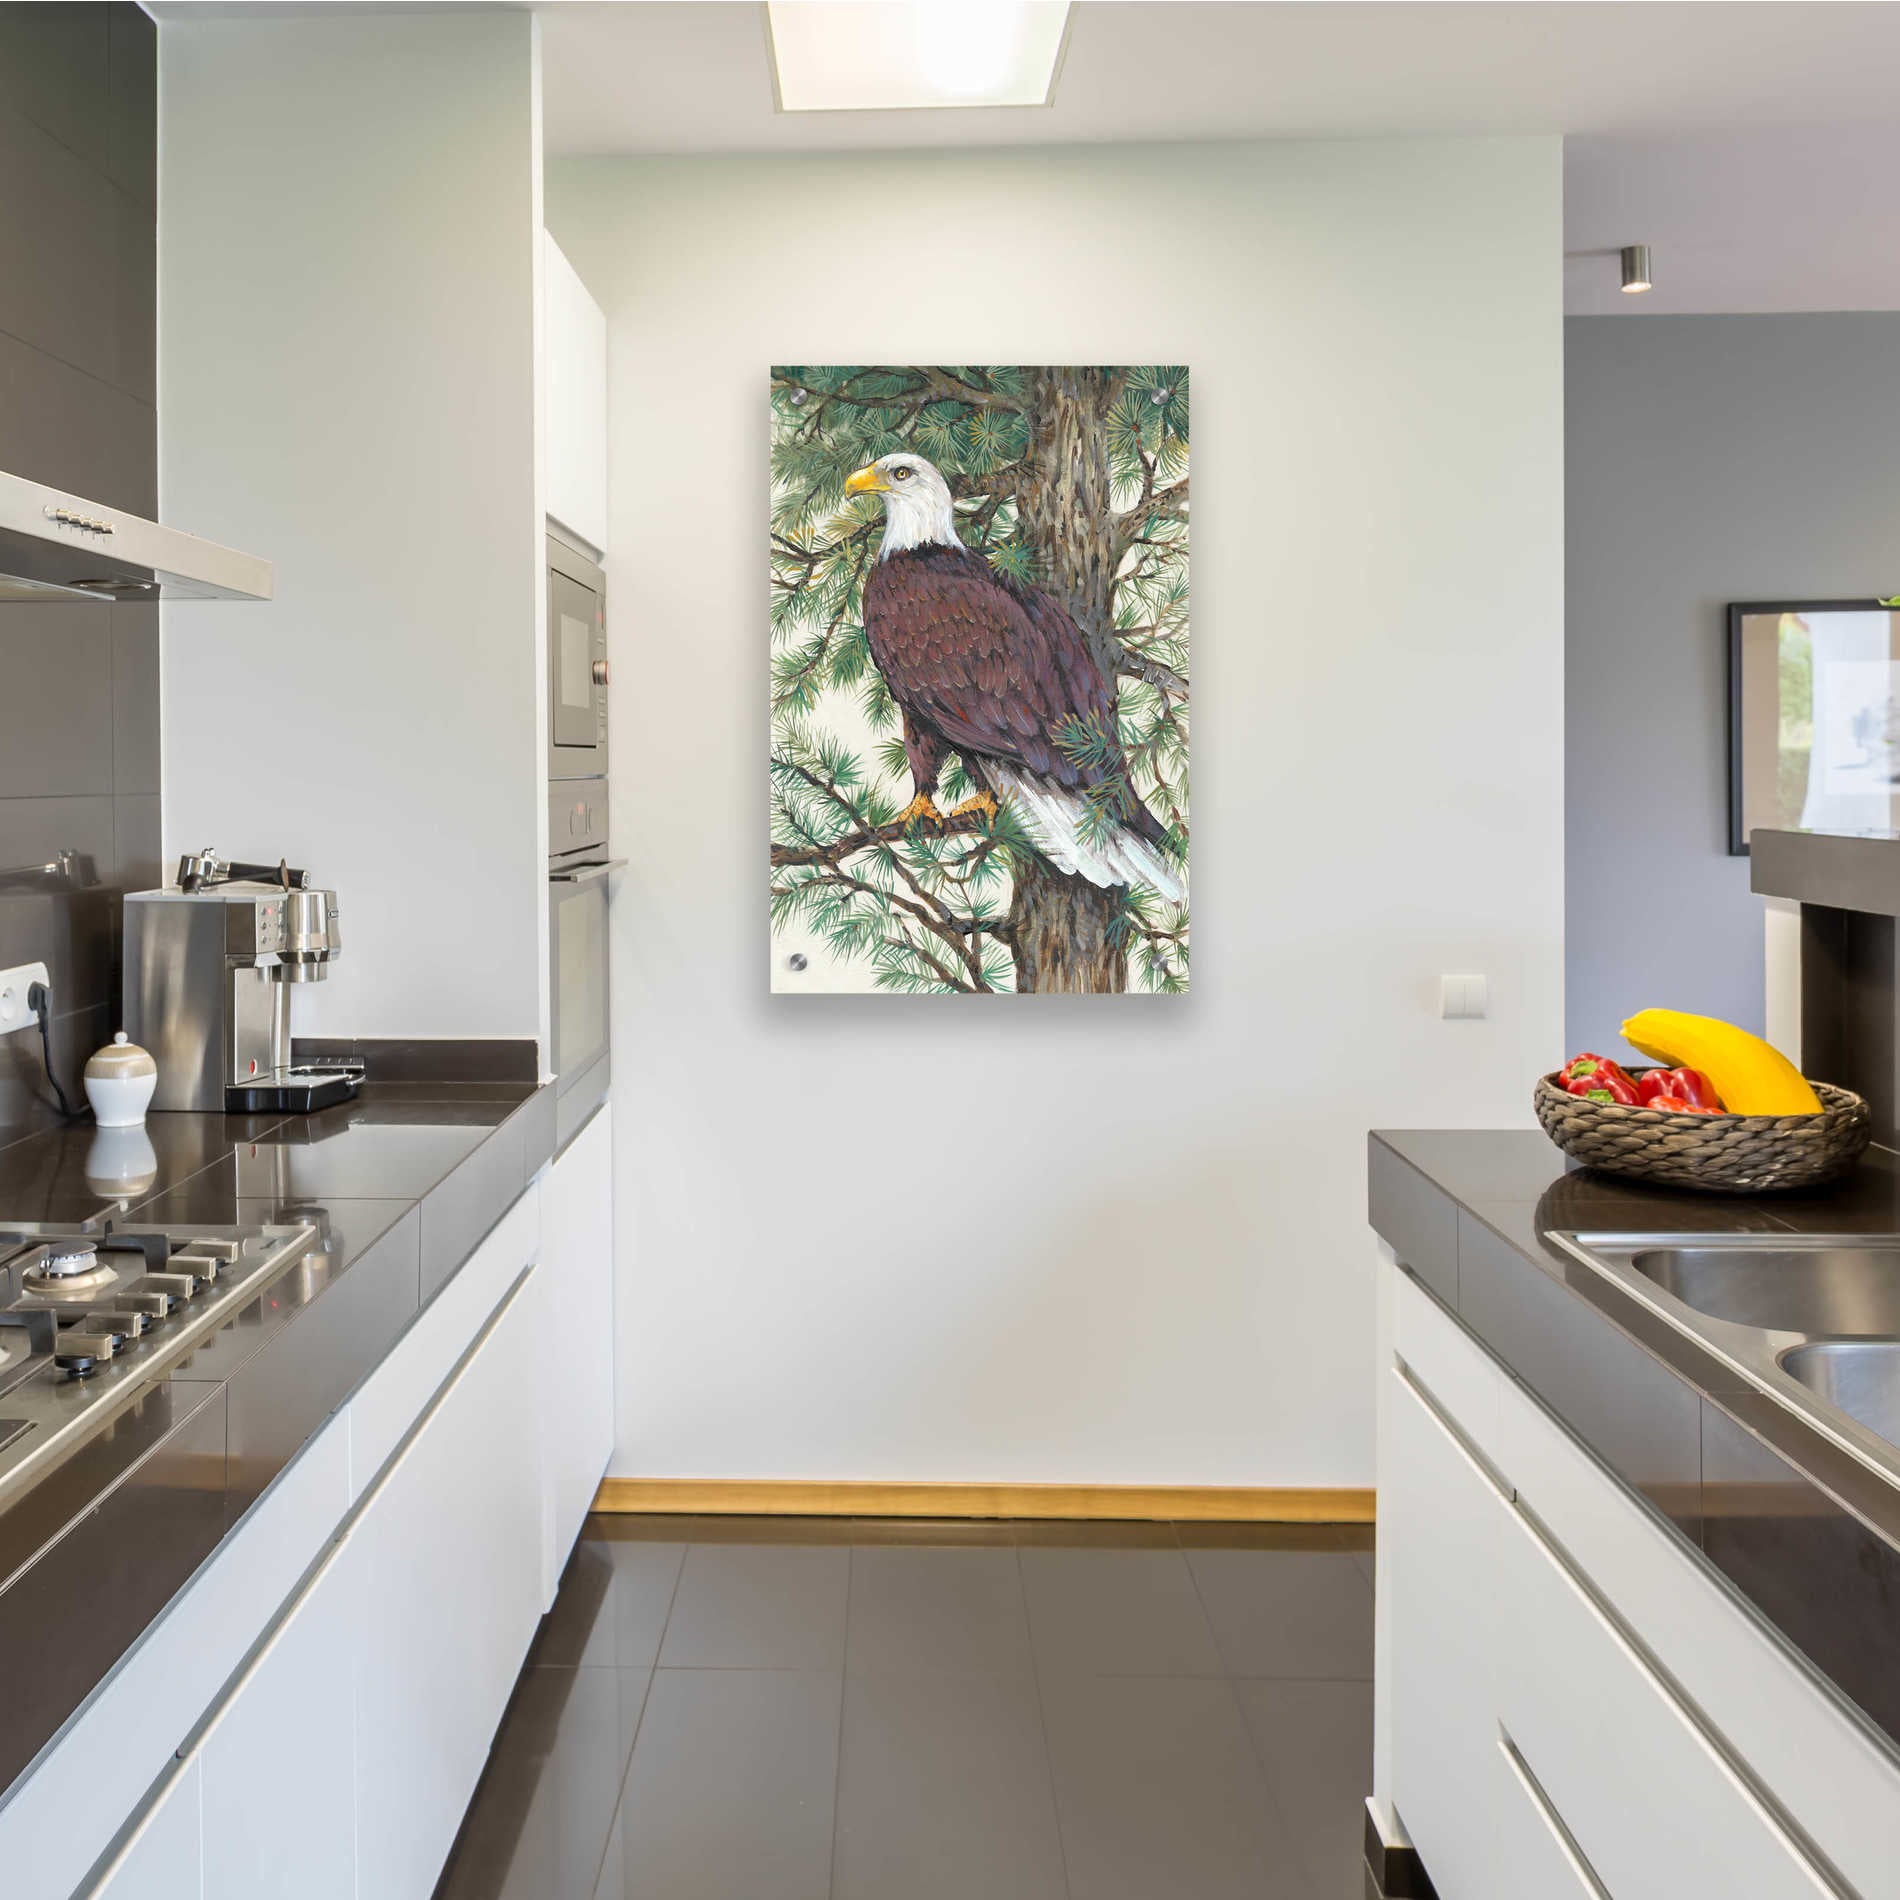 Epic Art 'Eagle in the Pine' by Tim O'Toole, Acrylic Glass Wall Art,24x36